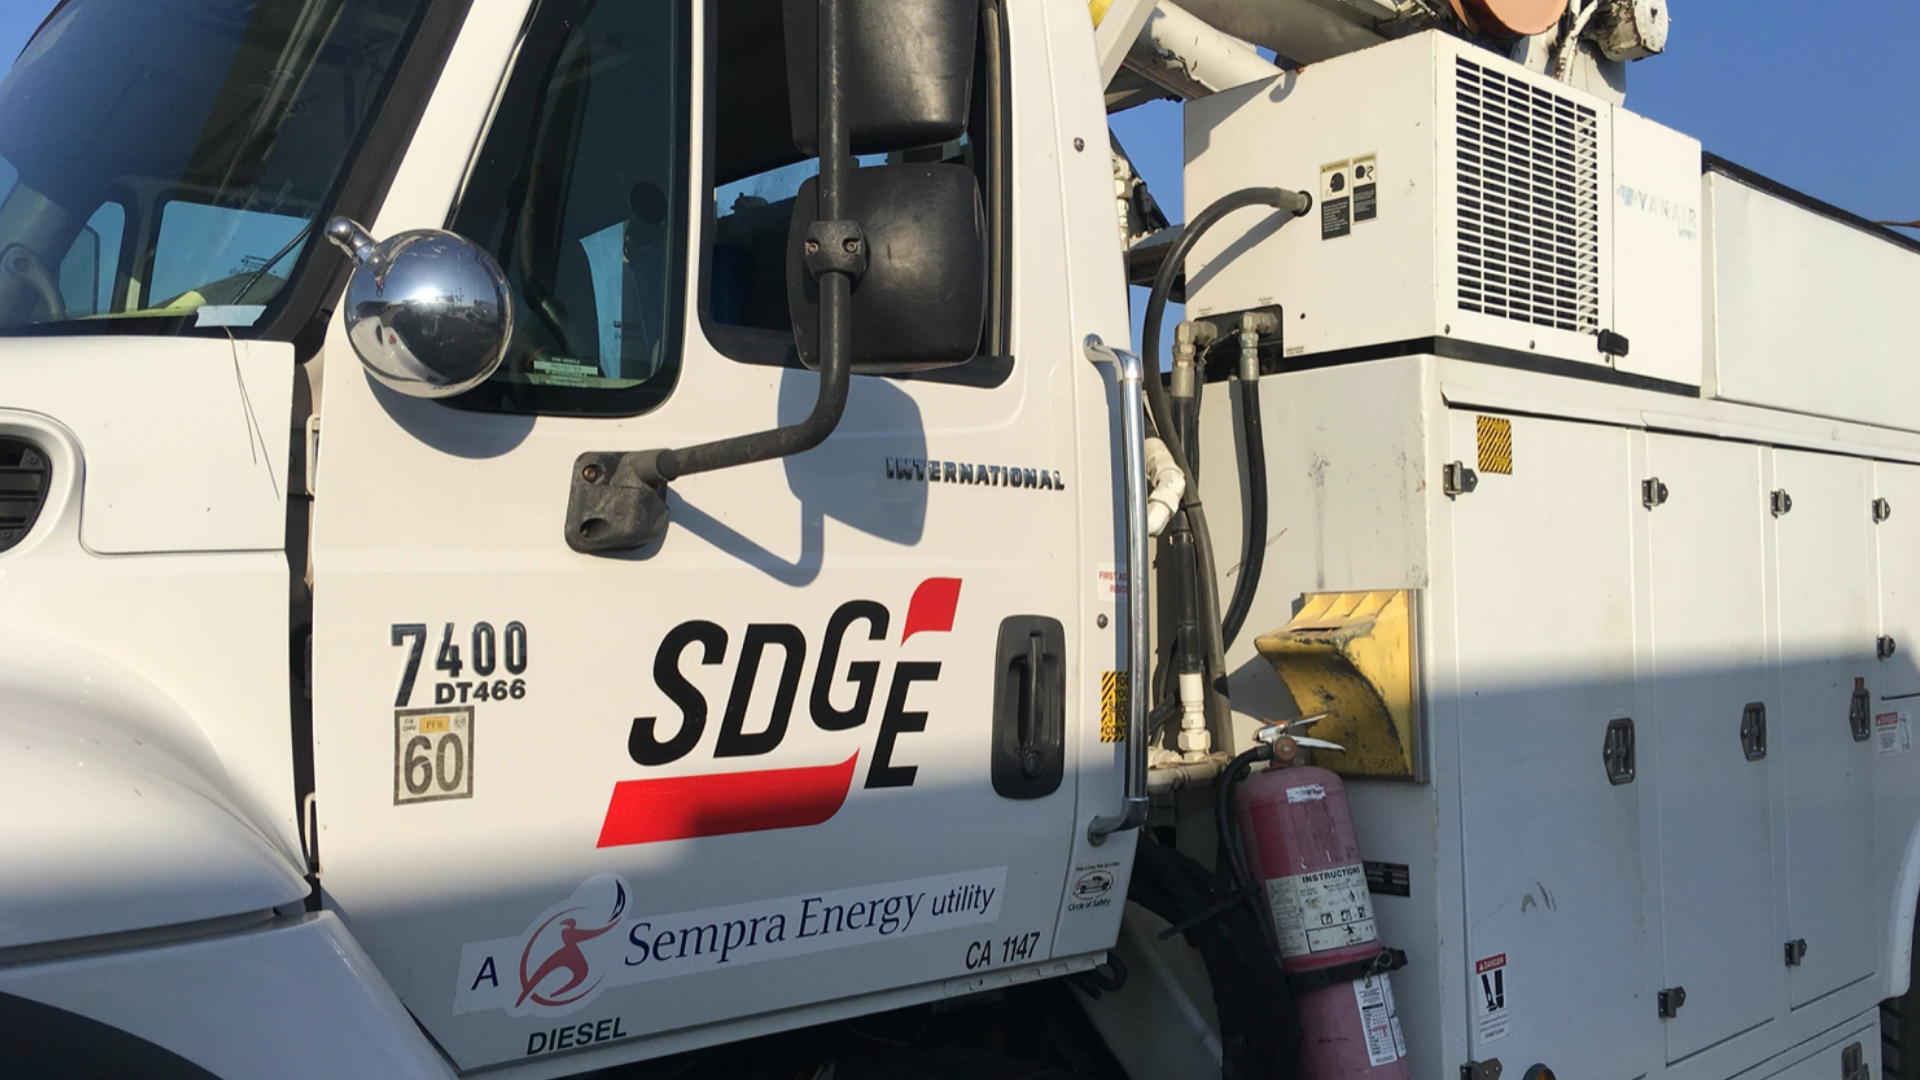 sdg-e-has-plans-in-place-to-maintain-service-reliability-sdge-san